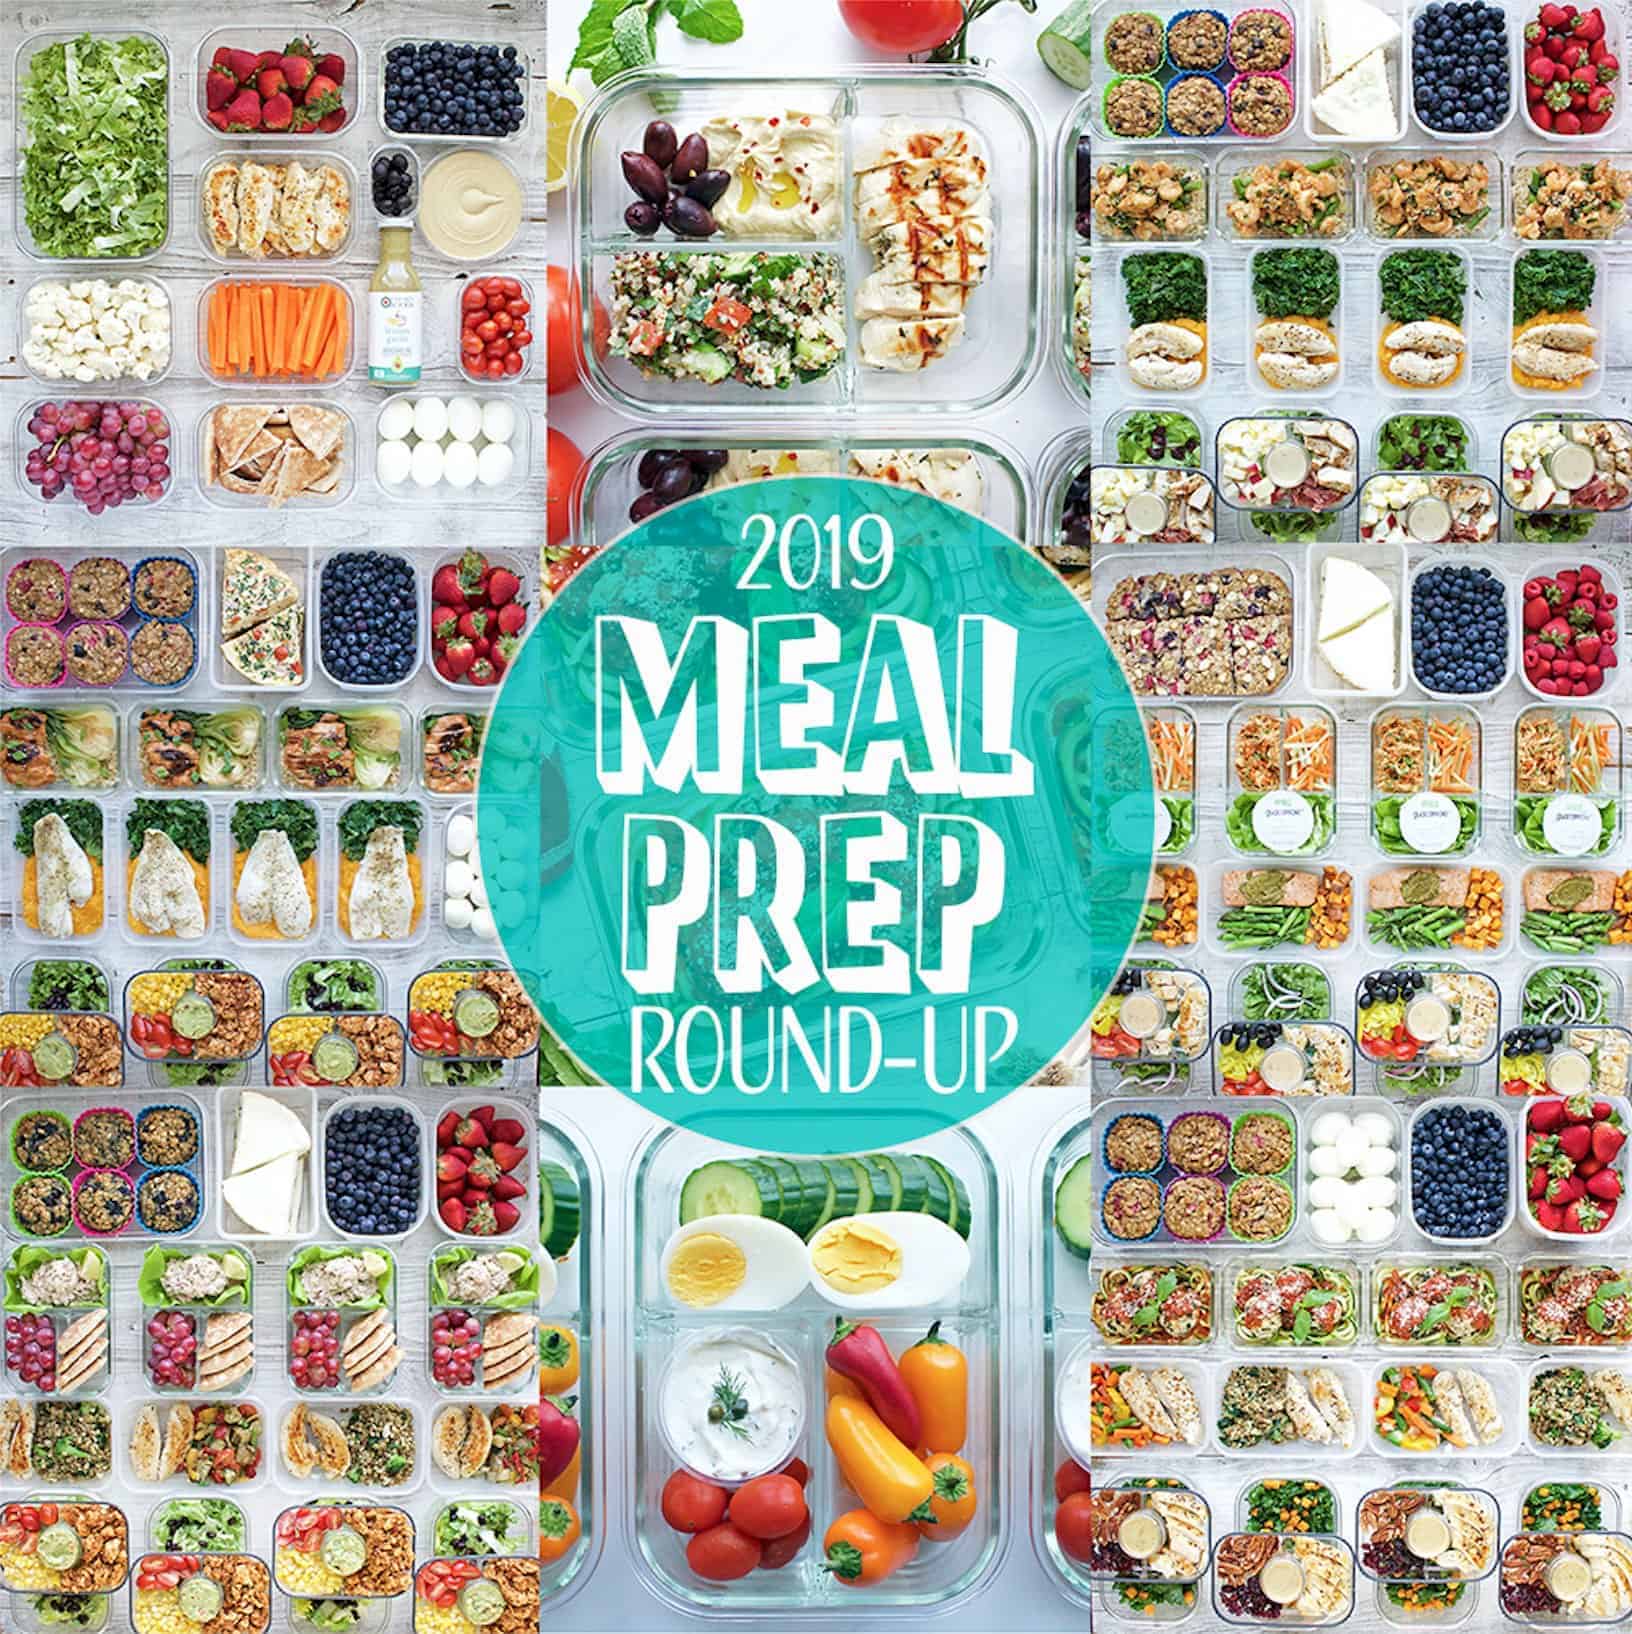 Healthy New Year: 2019 Meal Prep Round-Up